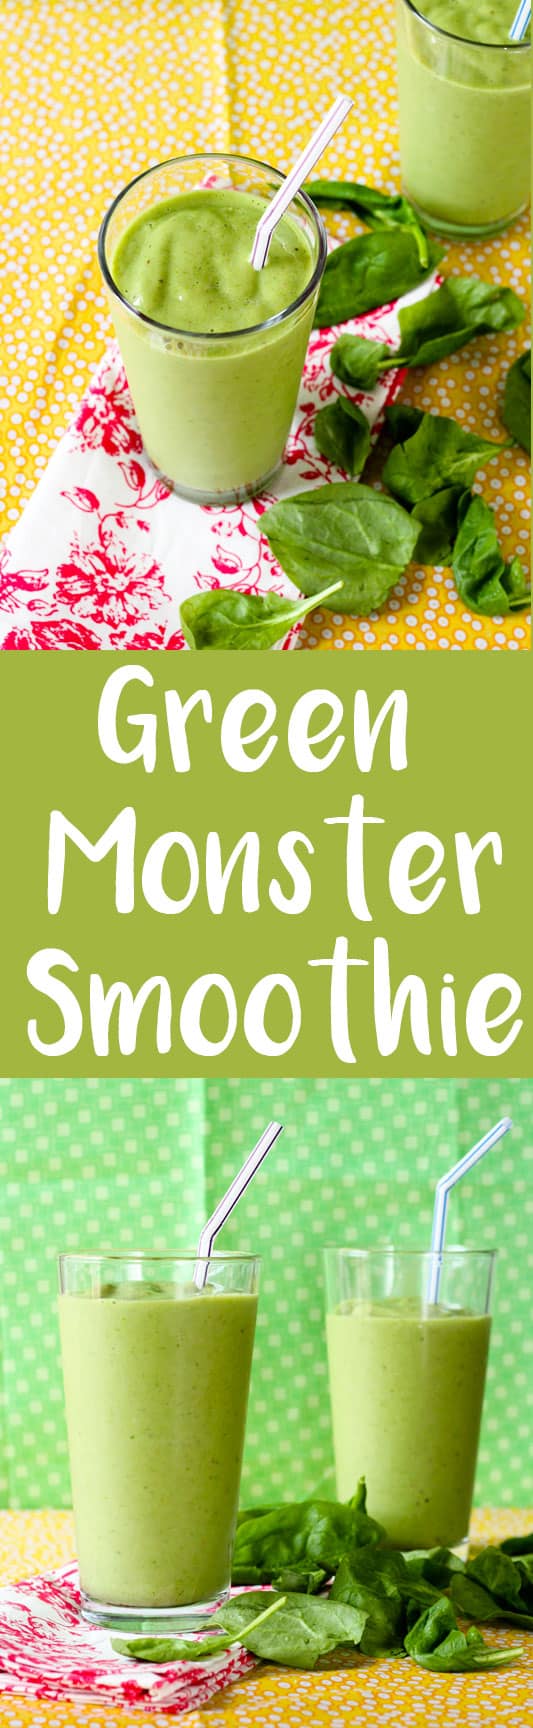 This green monster smoothie is packed with delicious fruit and you won't even be able to tell there is a healthy green leaf in here!